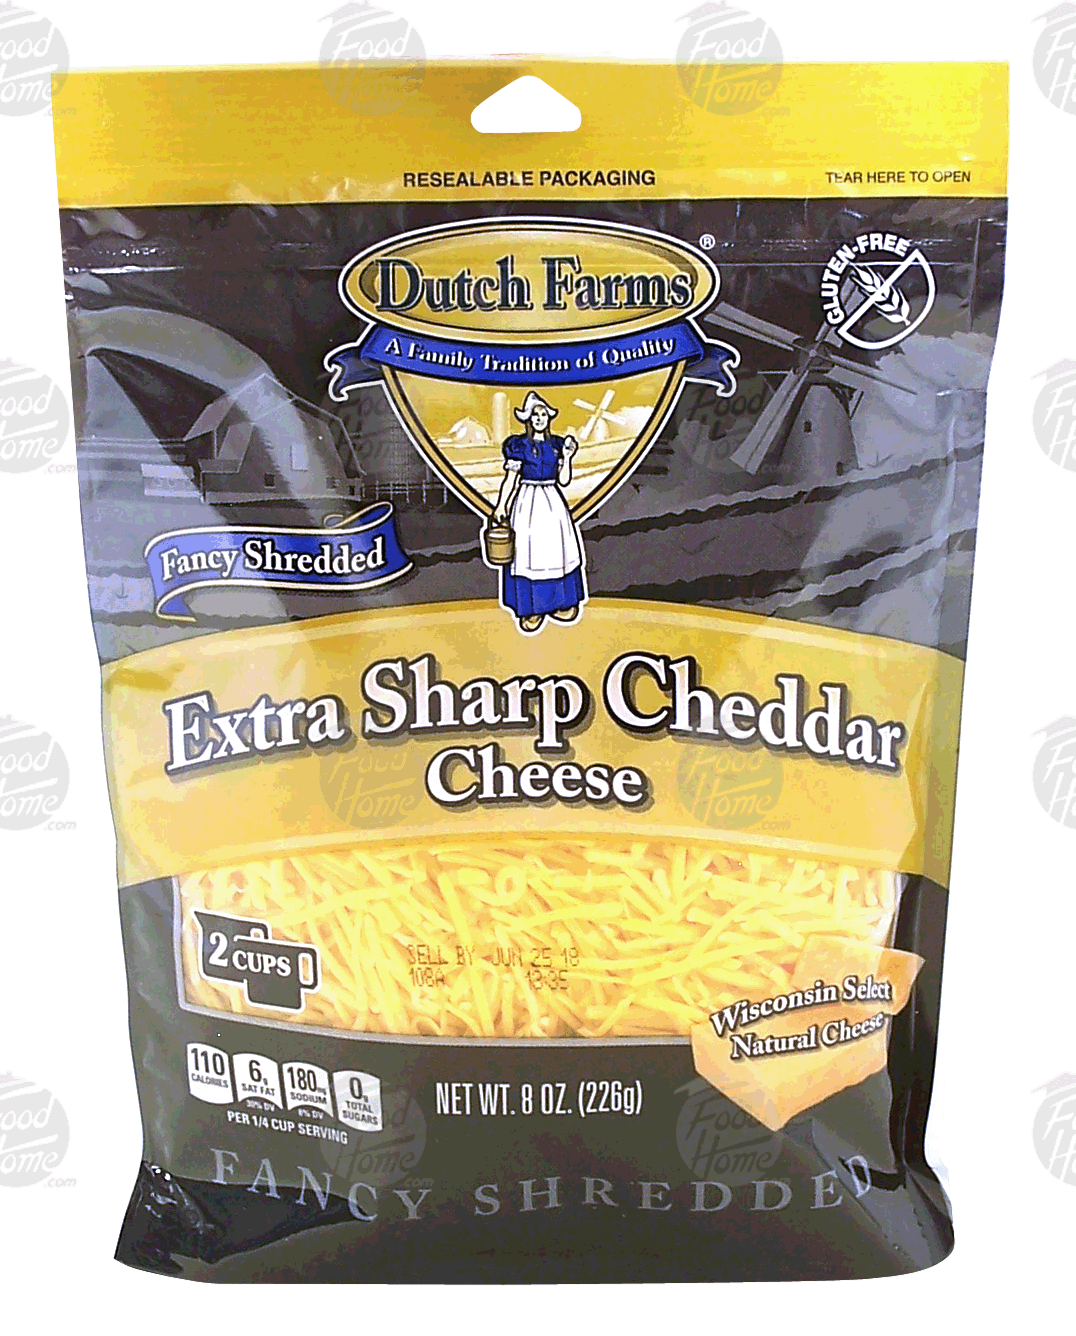 Dutch Farms Fancy Shredded extra sharp cheddar cheese, 2-cups Full-Size Picture